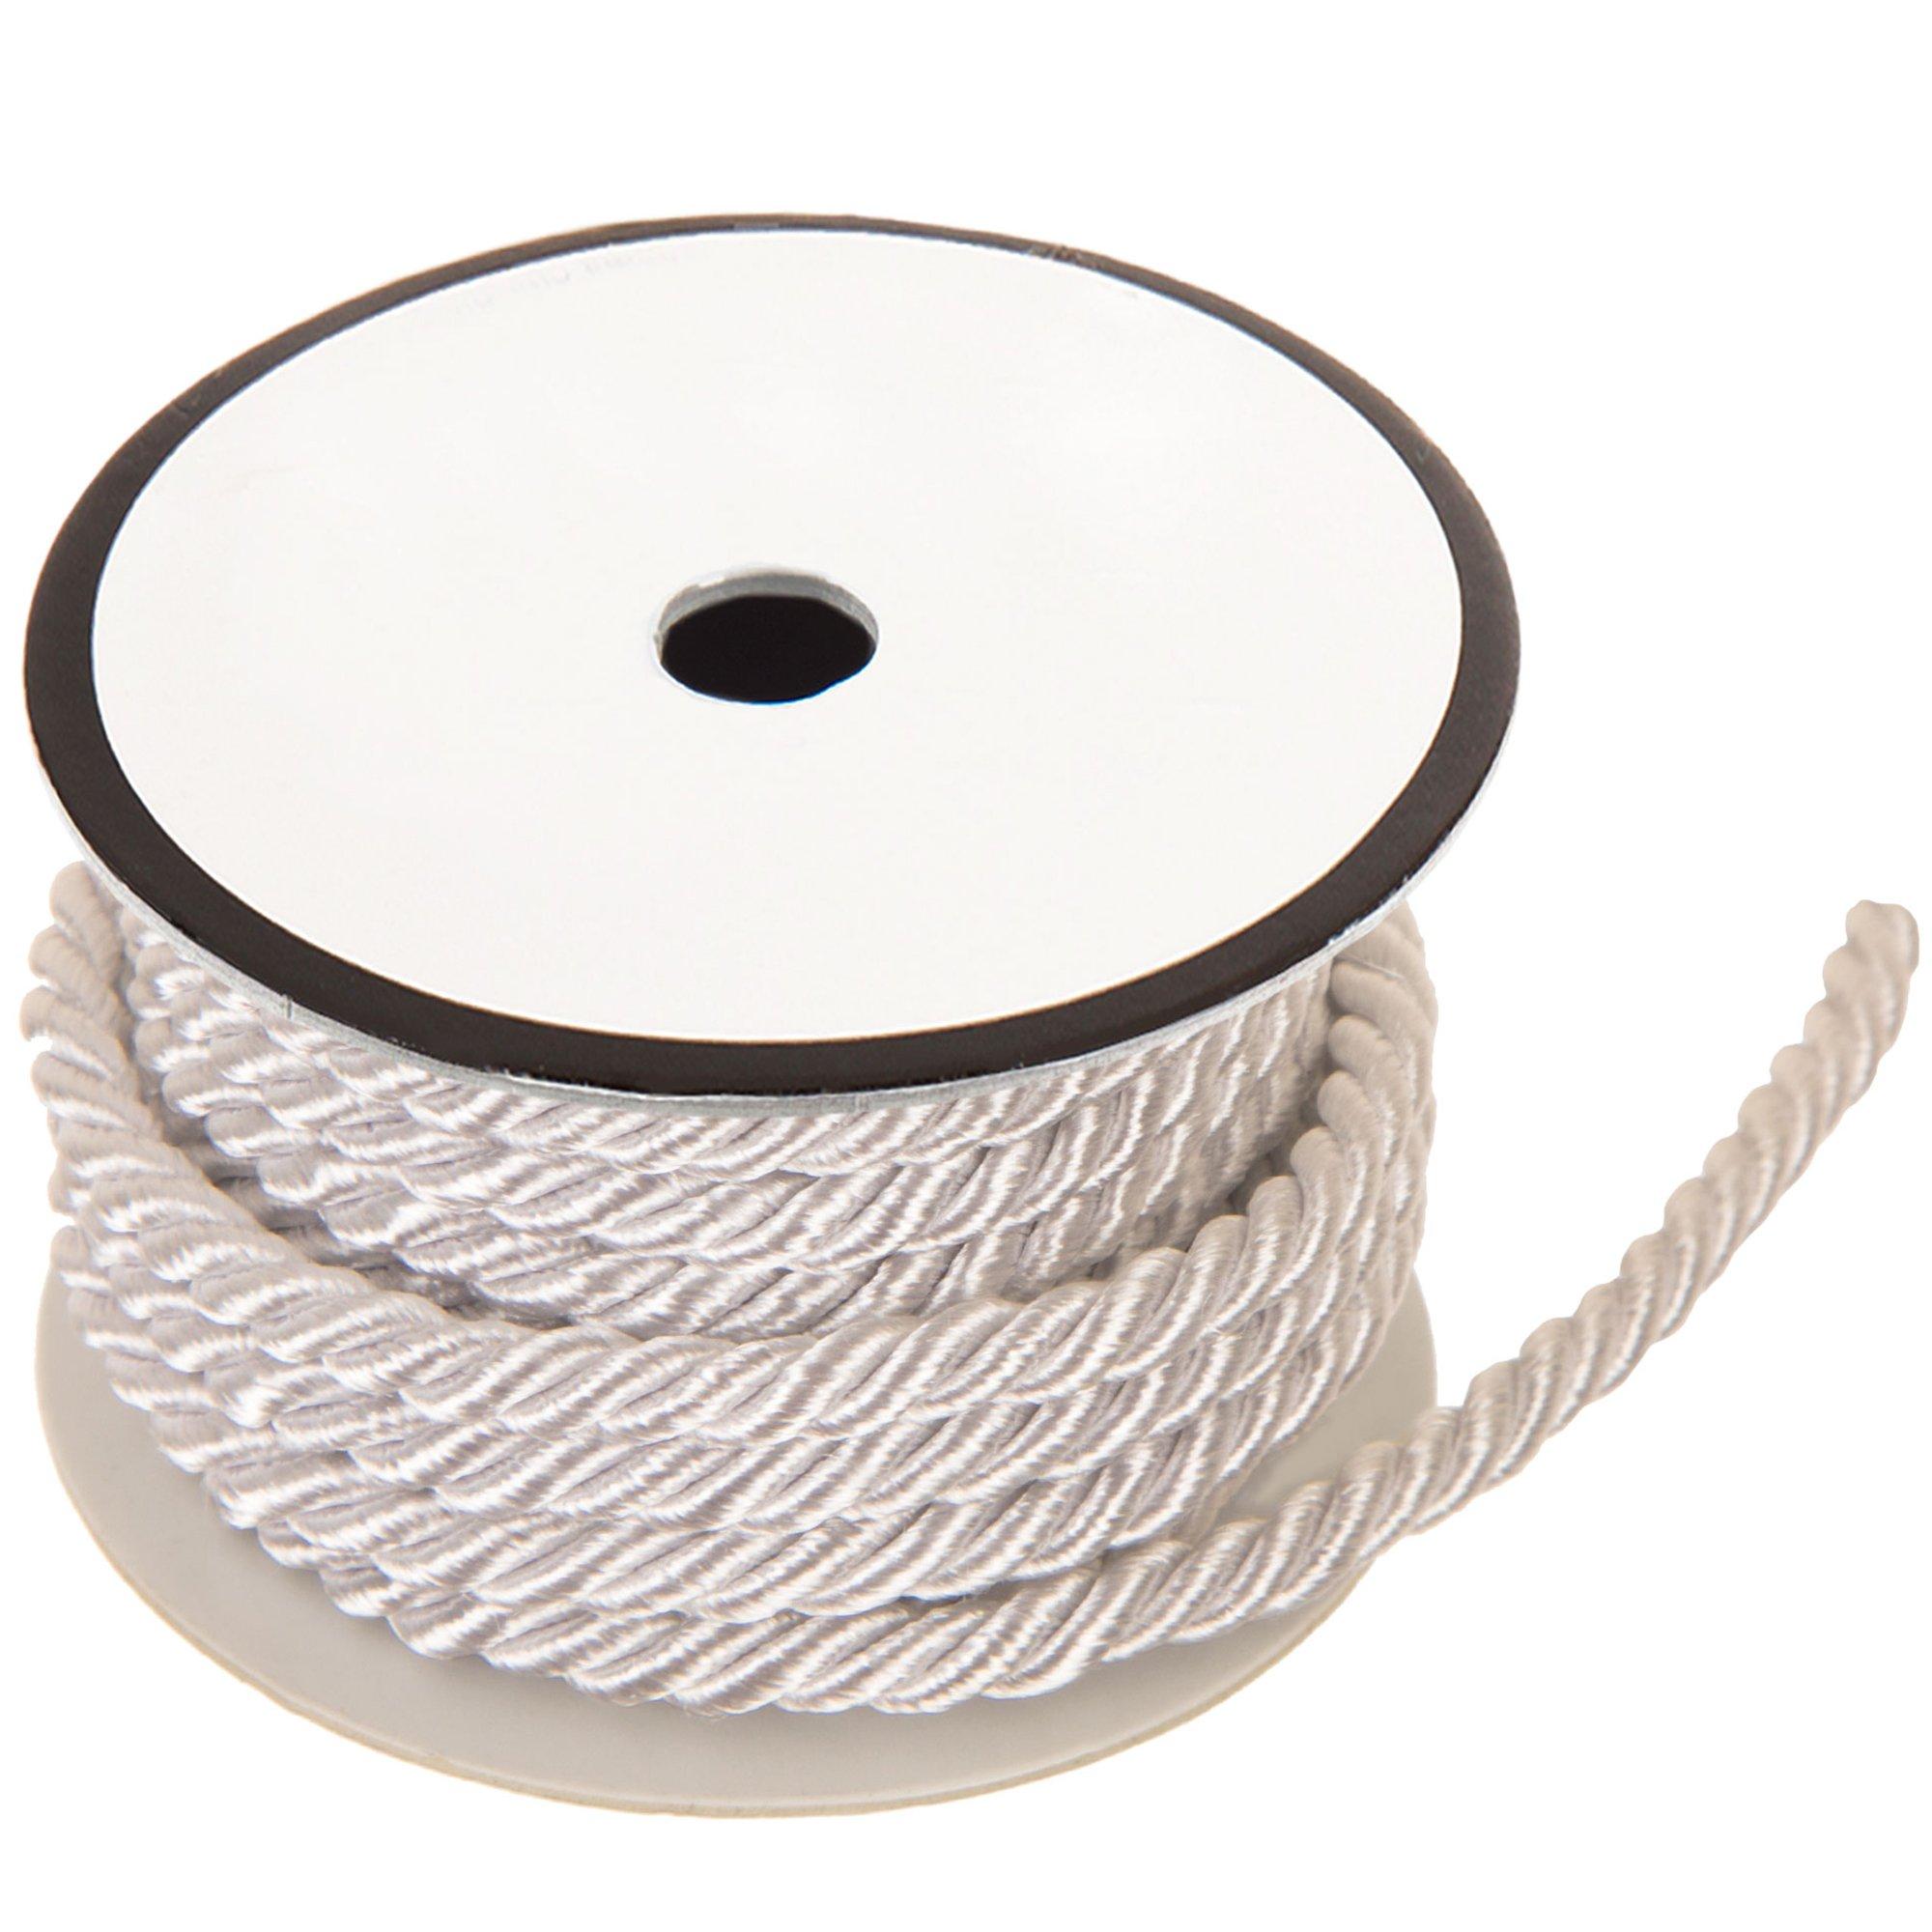 Ivory Off White Braided Rope Cord, Semisoft Trim Cord, Artificial Silk  Cord, Striped String Round Cord 7mm approx. - 18/46cm approx. (1 pc)